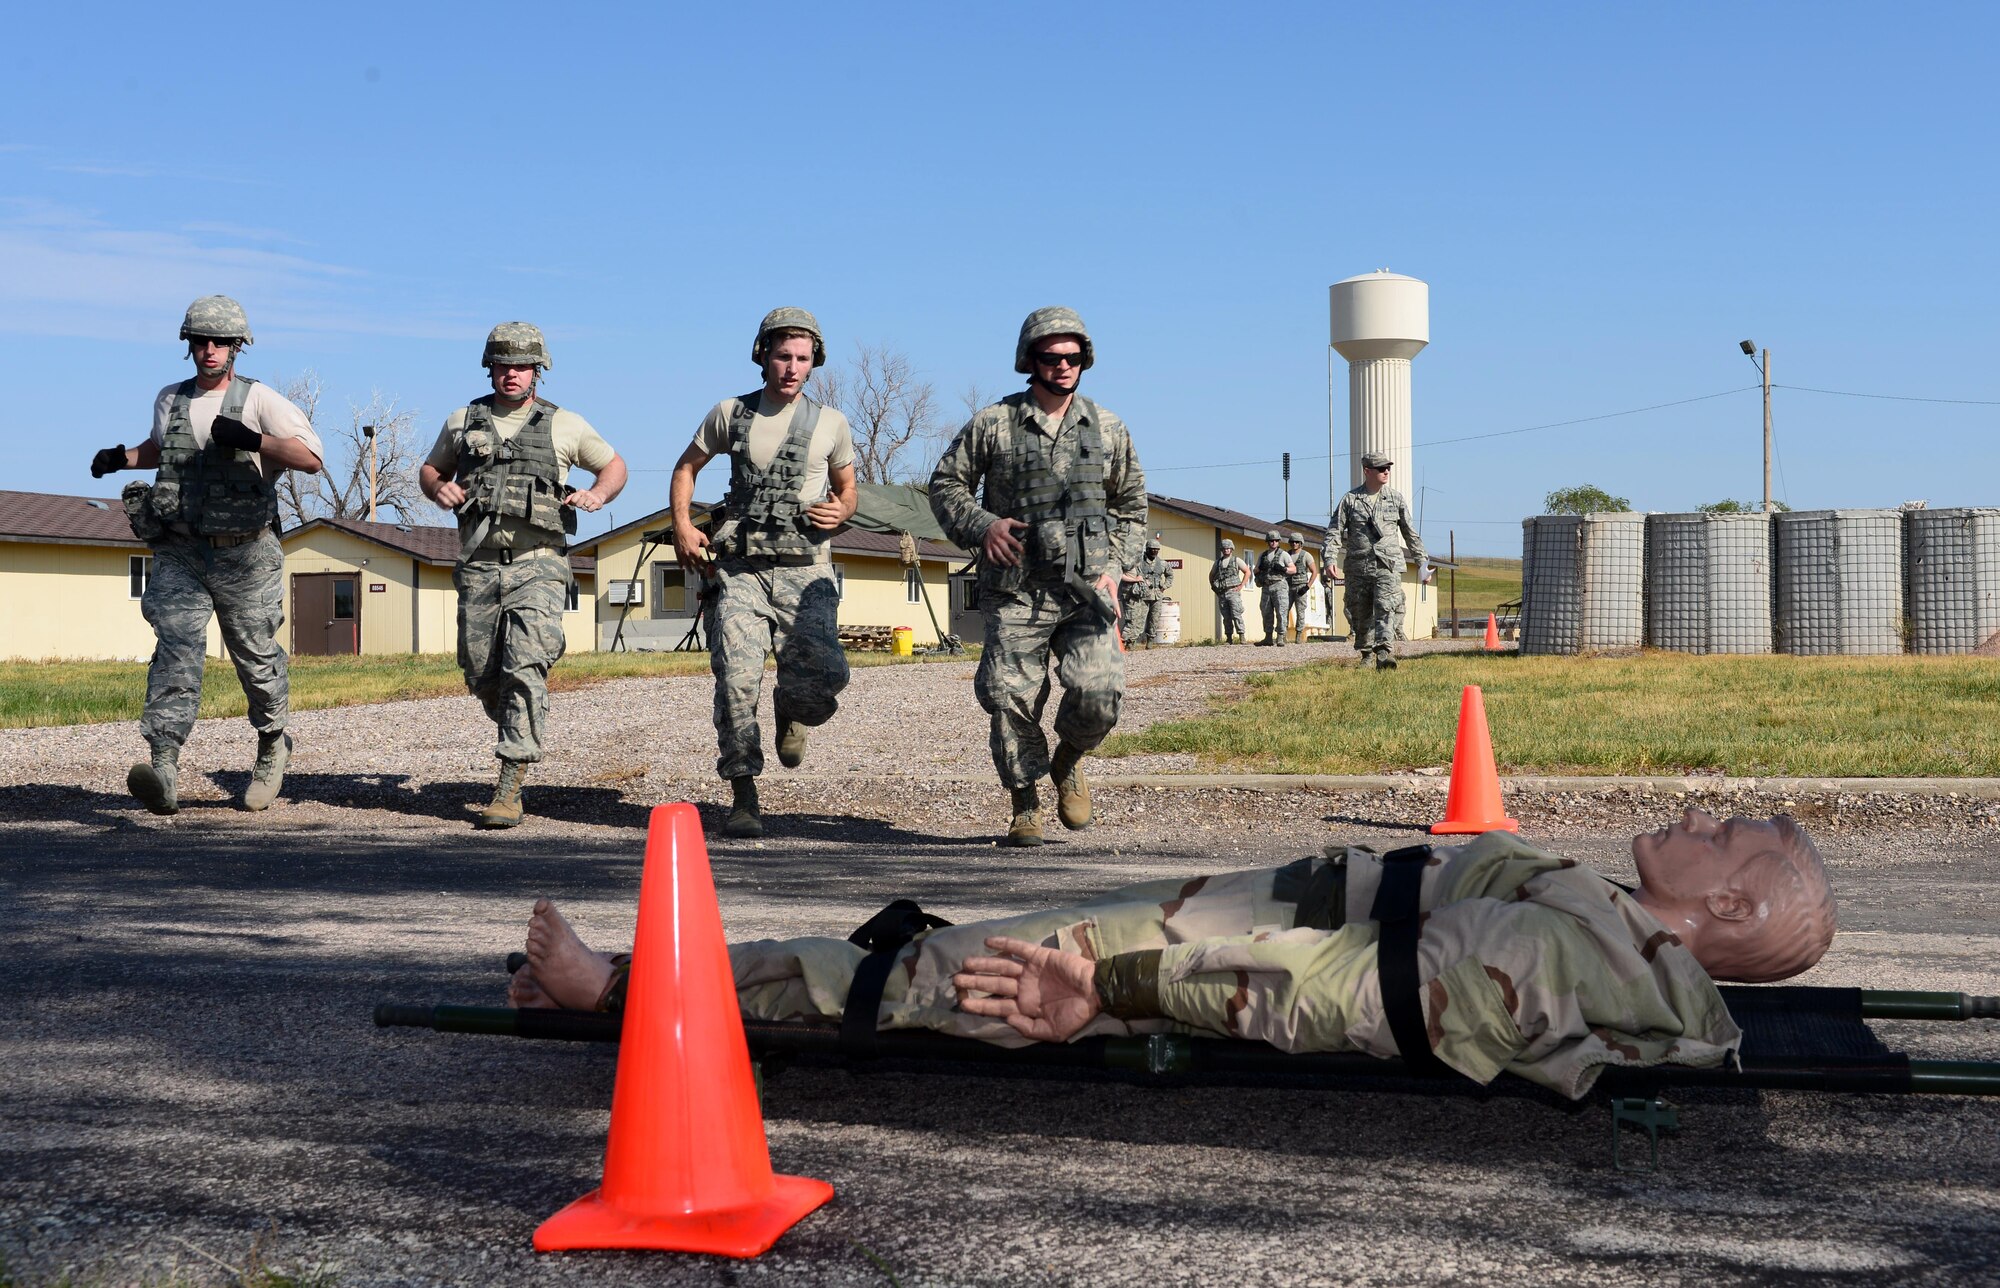 Airmen assigned to the 28th Civil Engineer Squadron rush over to complete a litter carry with a training dummy during the Prime Base Engineer Emergency Force (BEEF) challenge at Ellsworth Air Force Base, S.D., Aug. 17, 2017.